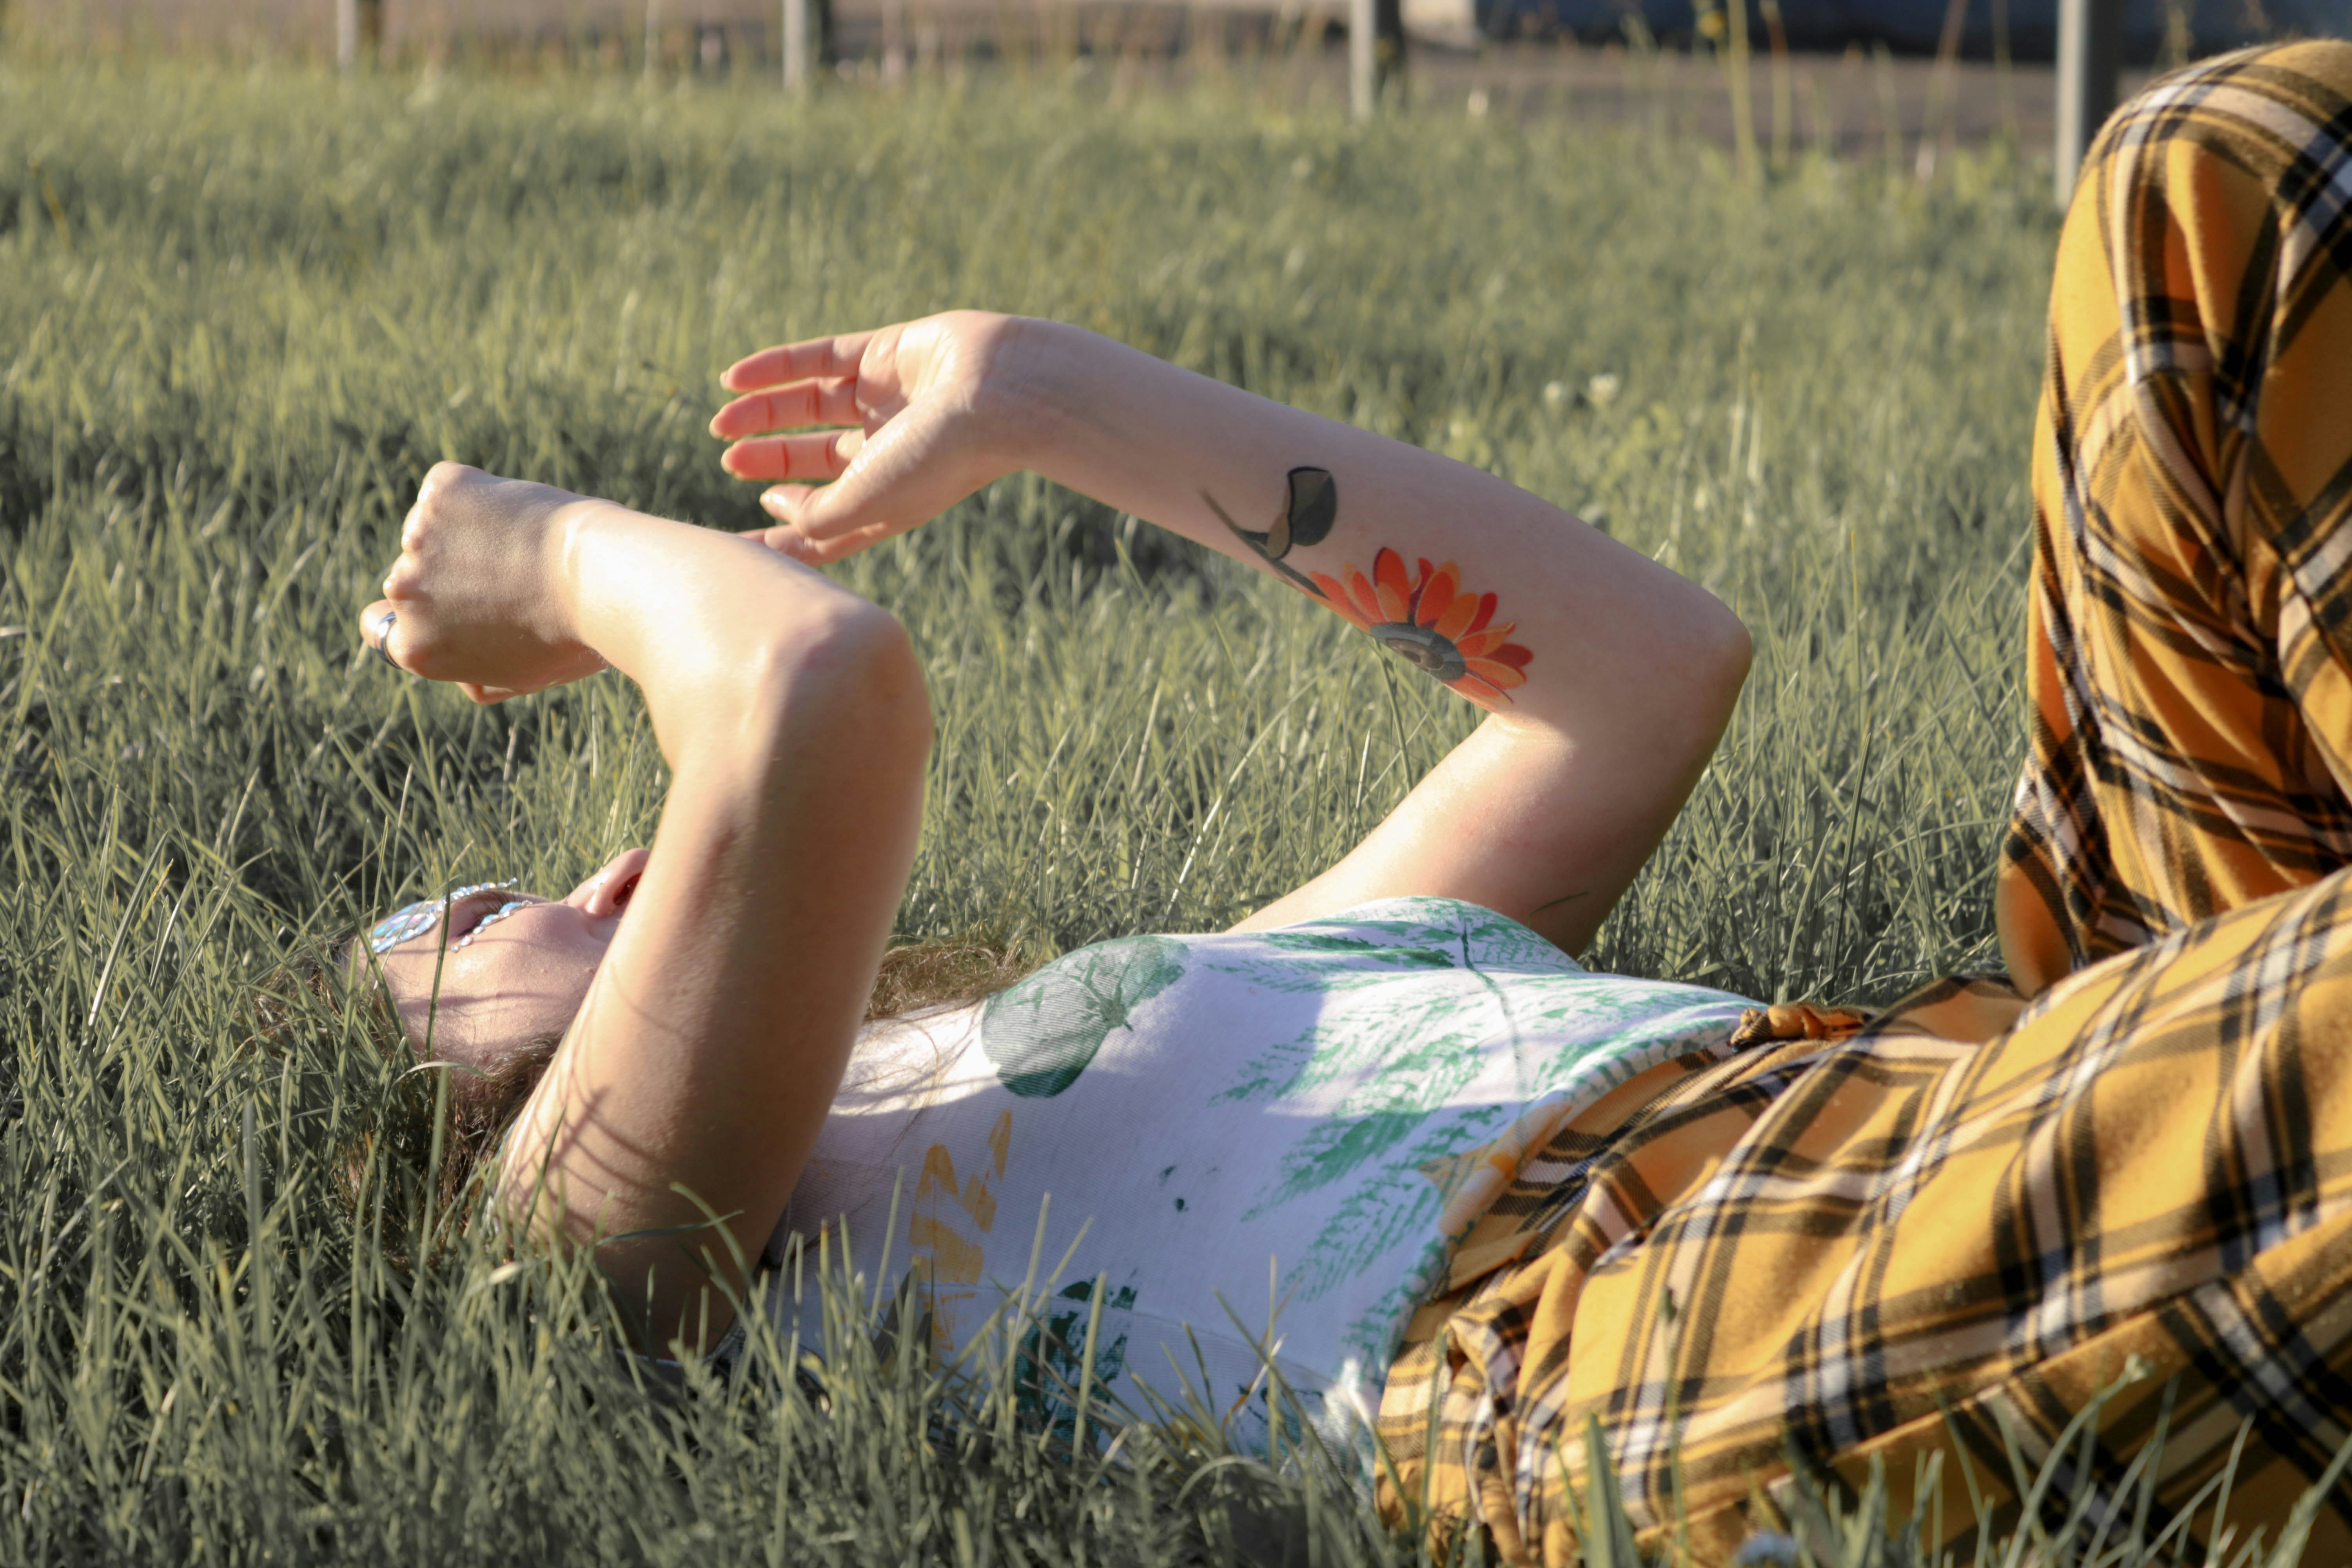 woman in white and brown floral dress lying on green grass field during daytime